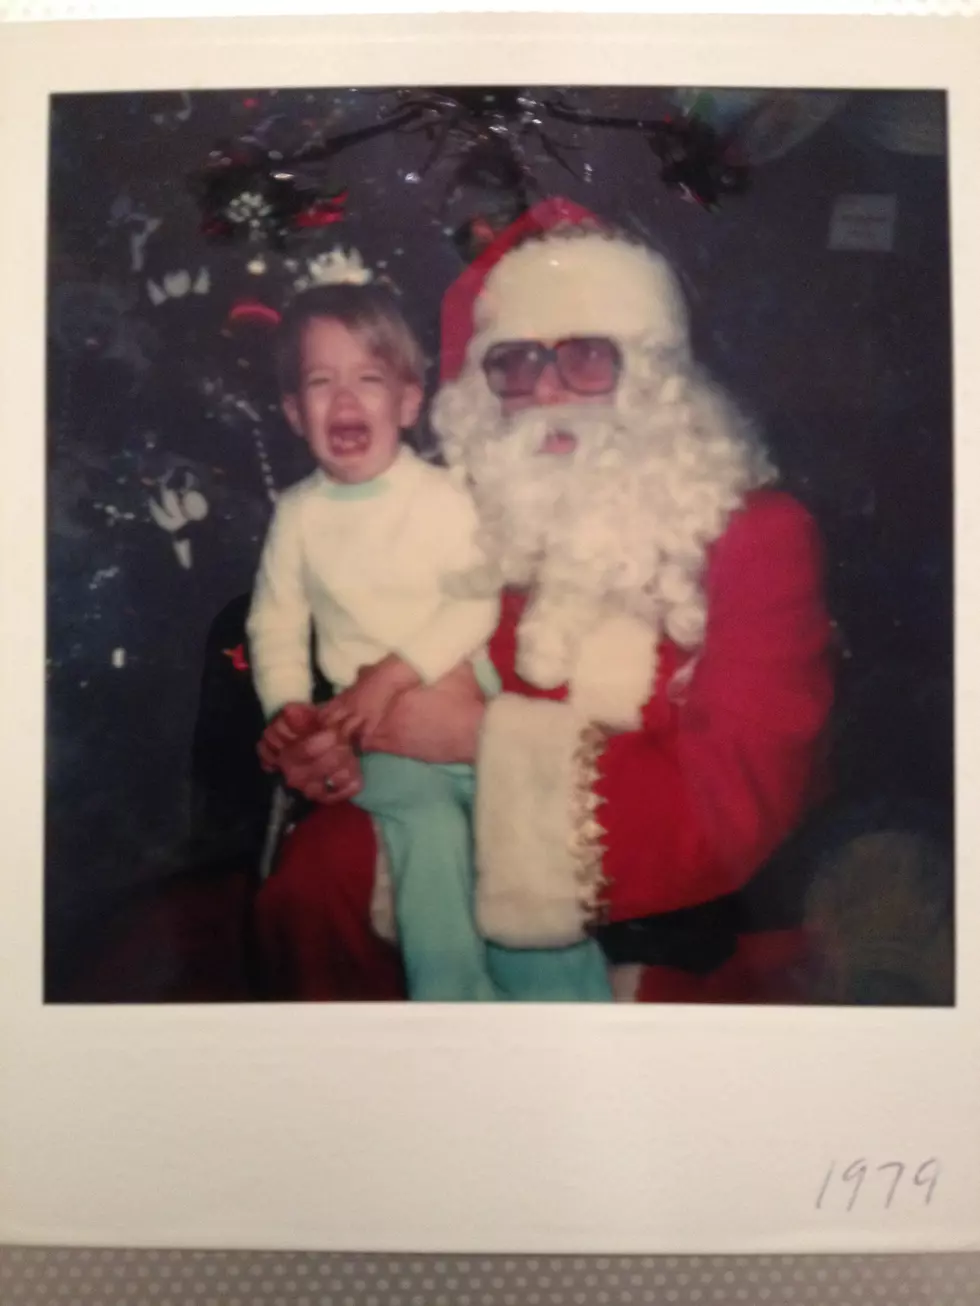 Scared Of Santa 2013 &#8212; Round 1, Group 5